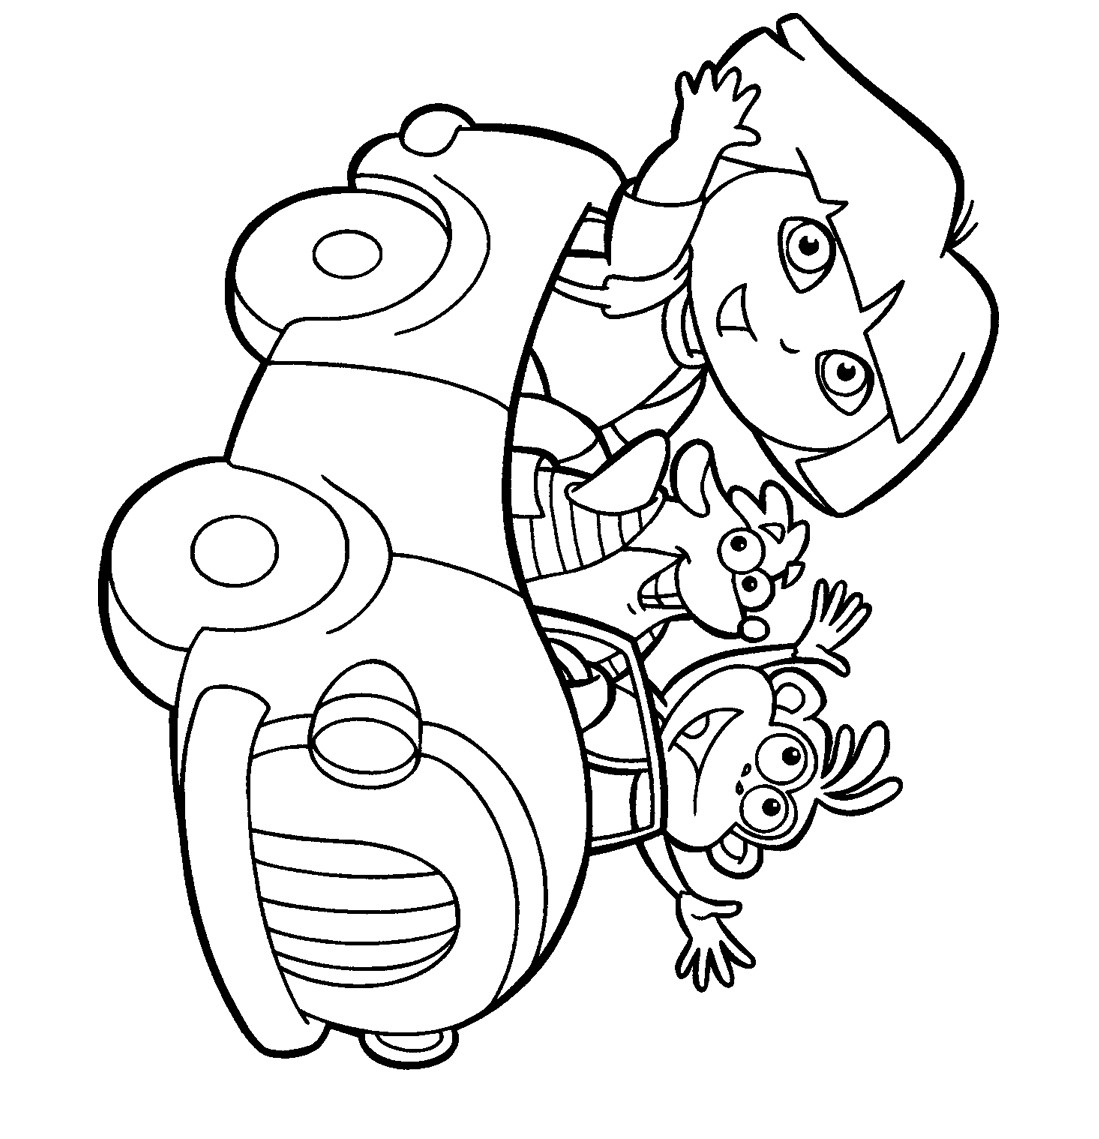 Printable Coloring Book For Kids Download
 Free Downloadable Coloring Pages For Kids Design Kids